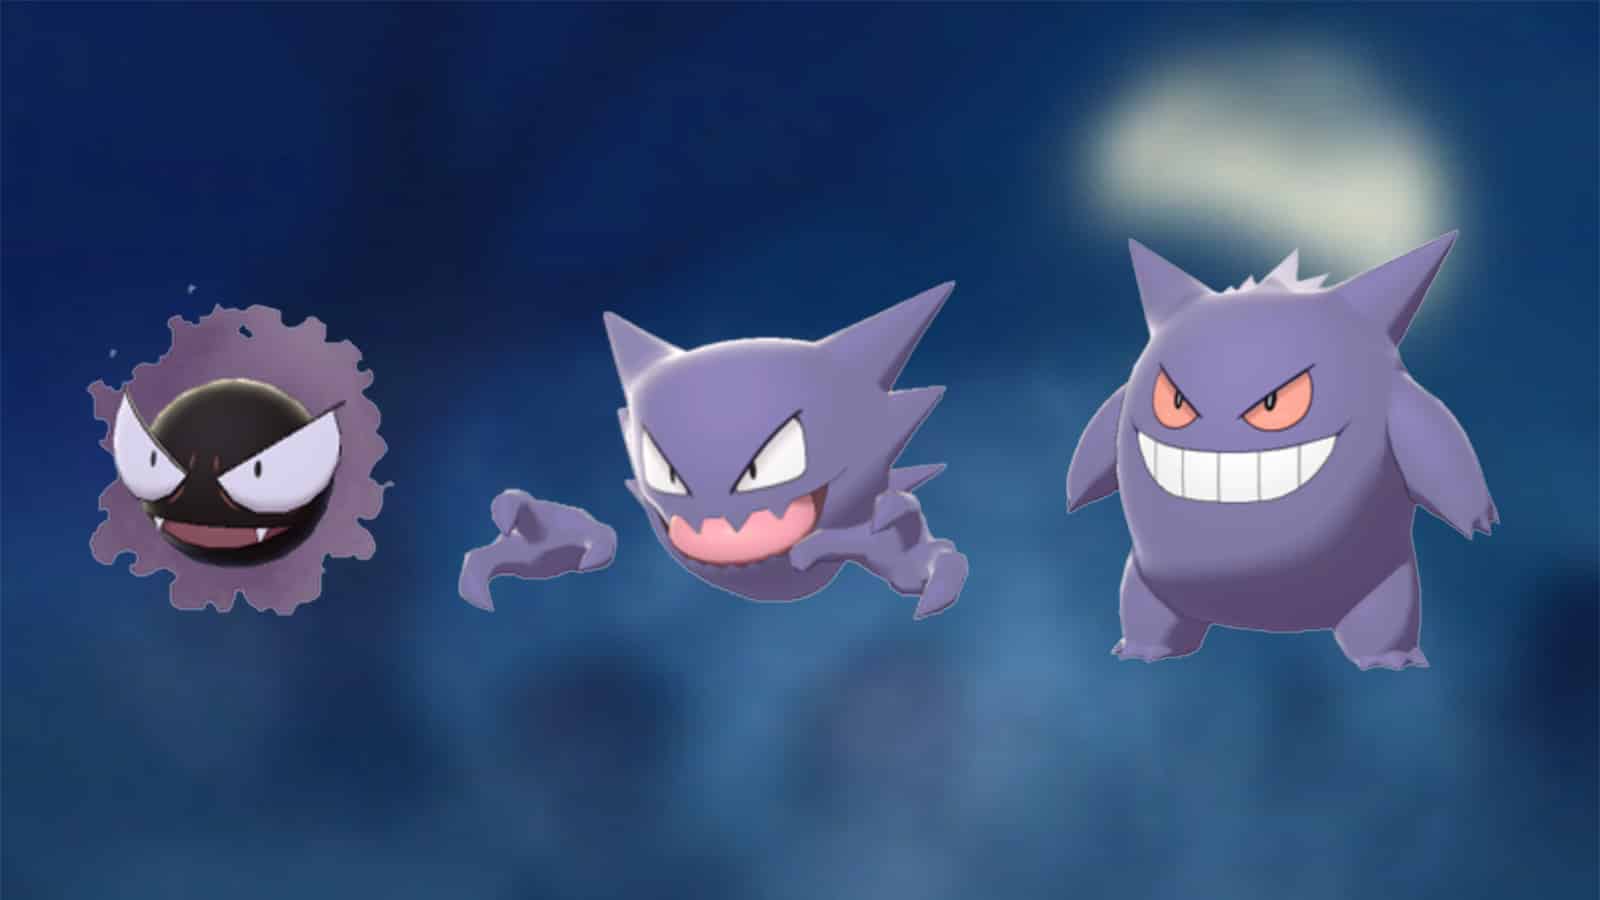 Ghastly, Haunter, and Gengar ghost-type Pokemon with weaknesses.